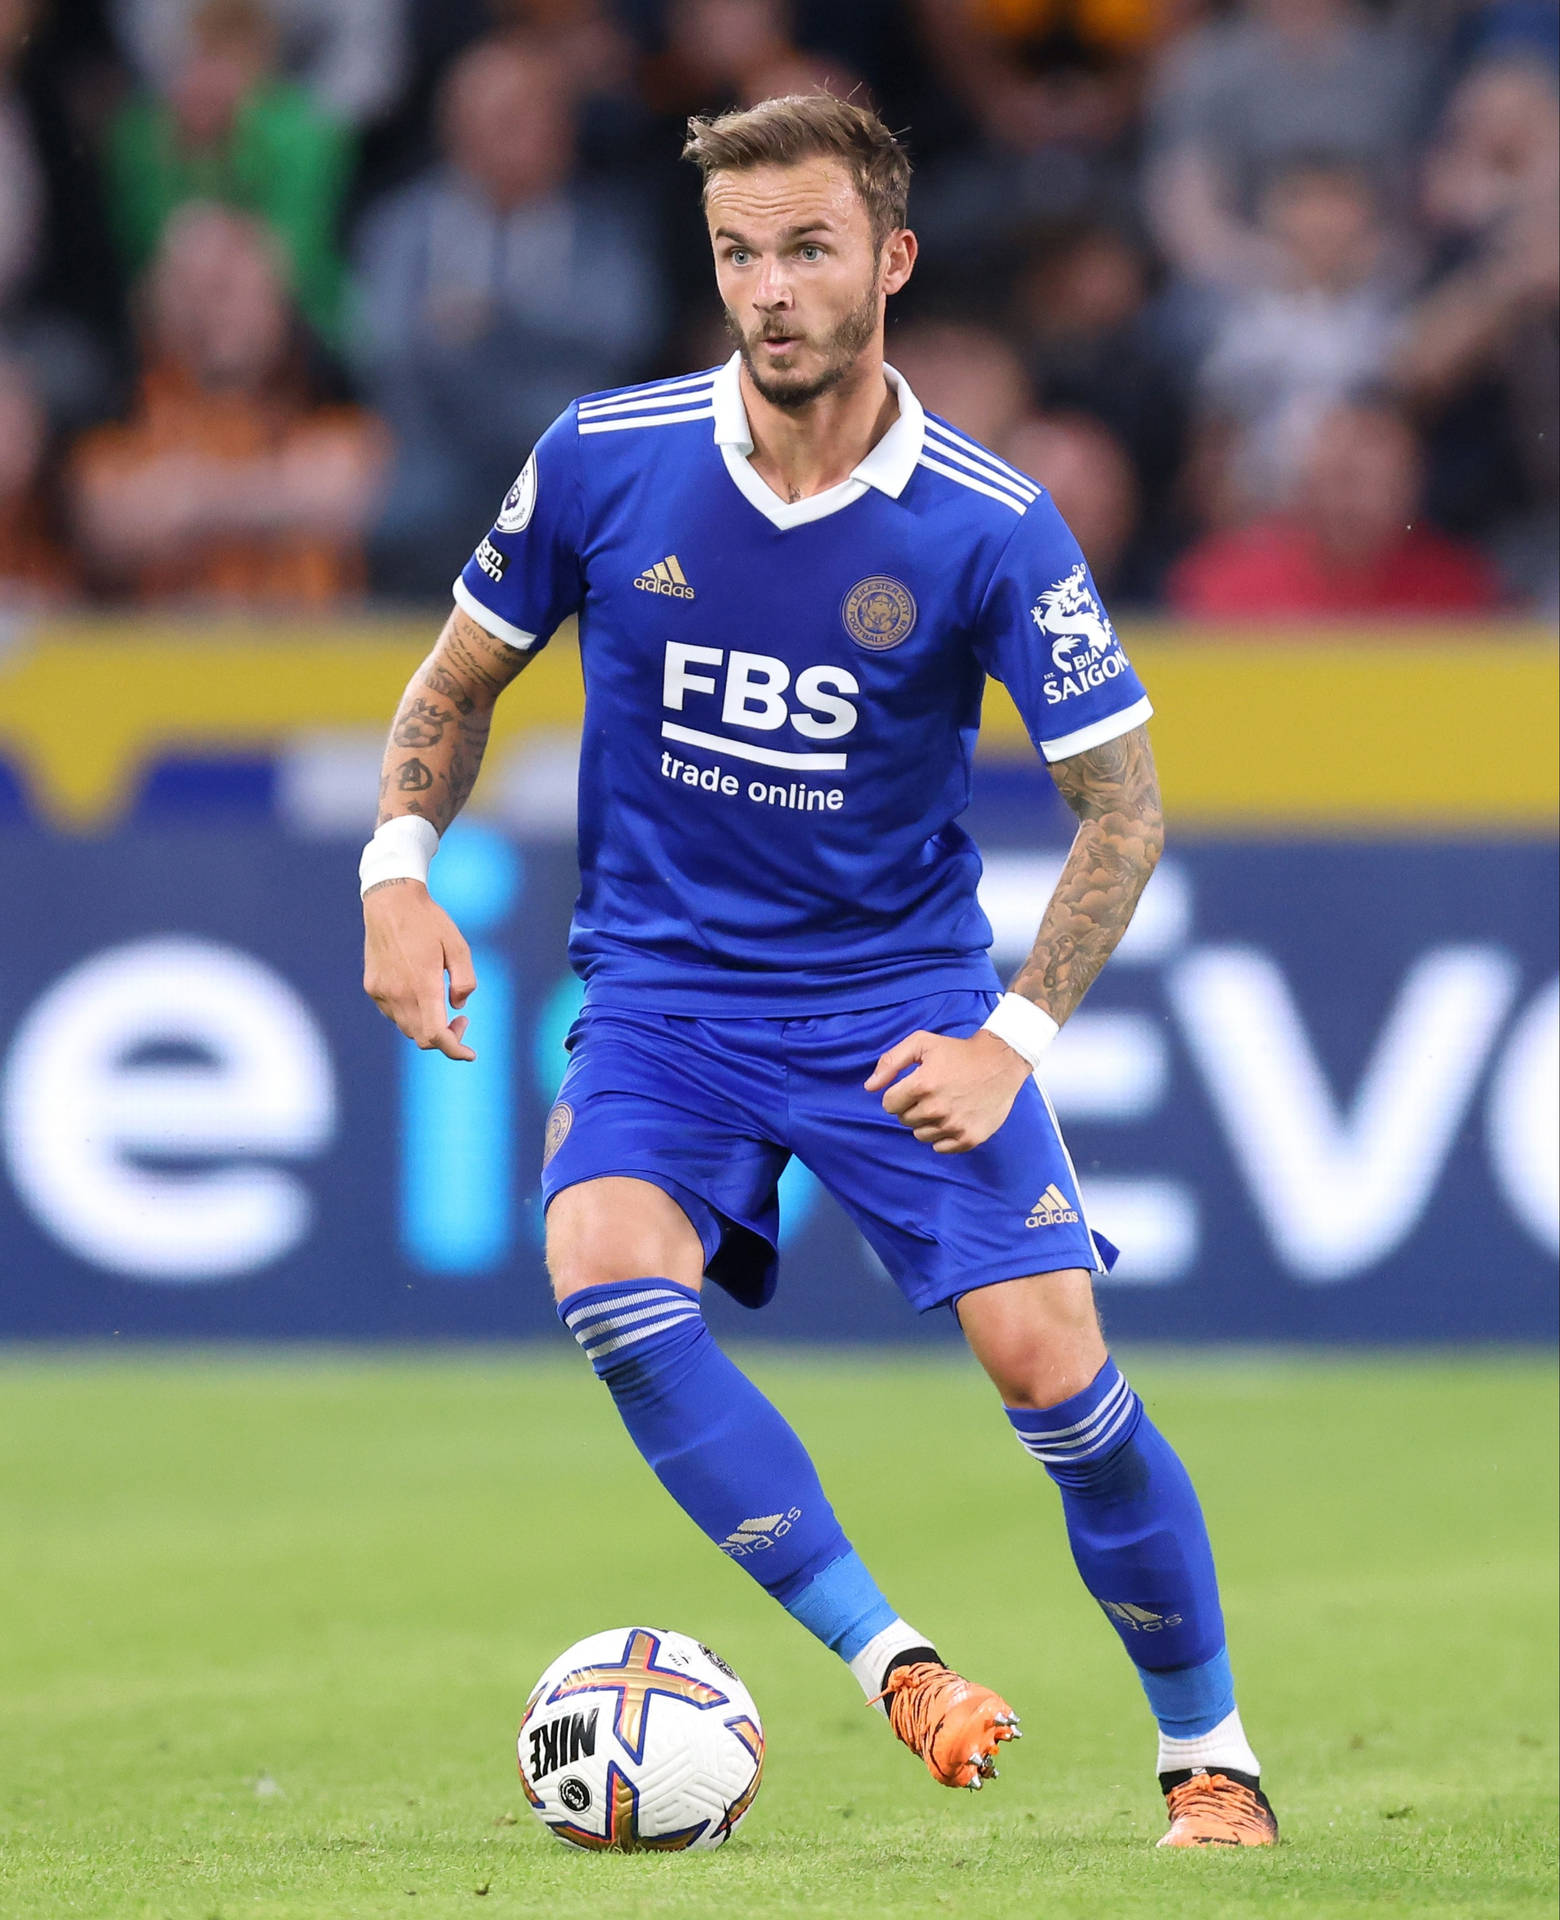 Jamesmaddison Fbs Is Not A Known Term Or Phrase Related To Computer Or Mobile Wallpaper. Therefore, No Translation Is Needed. Wallpaper